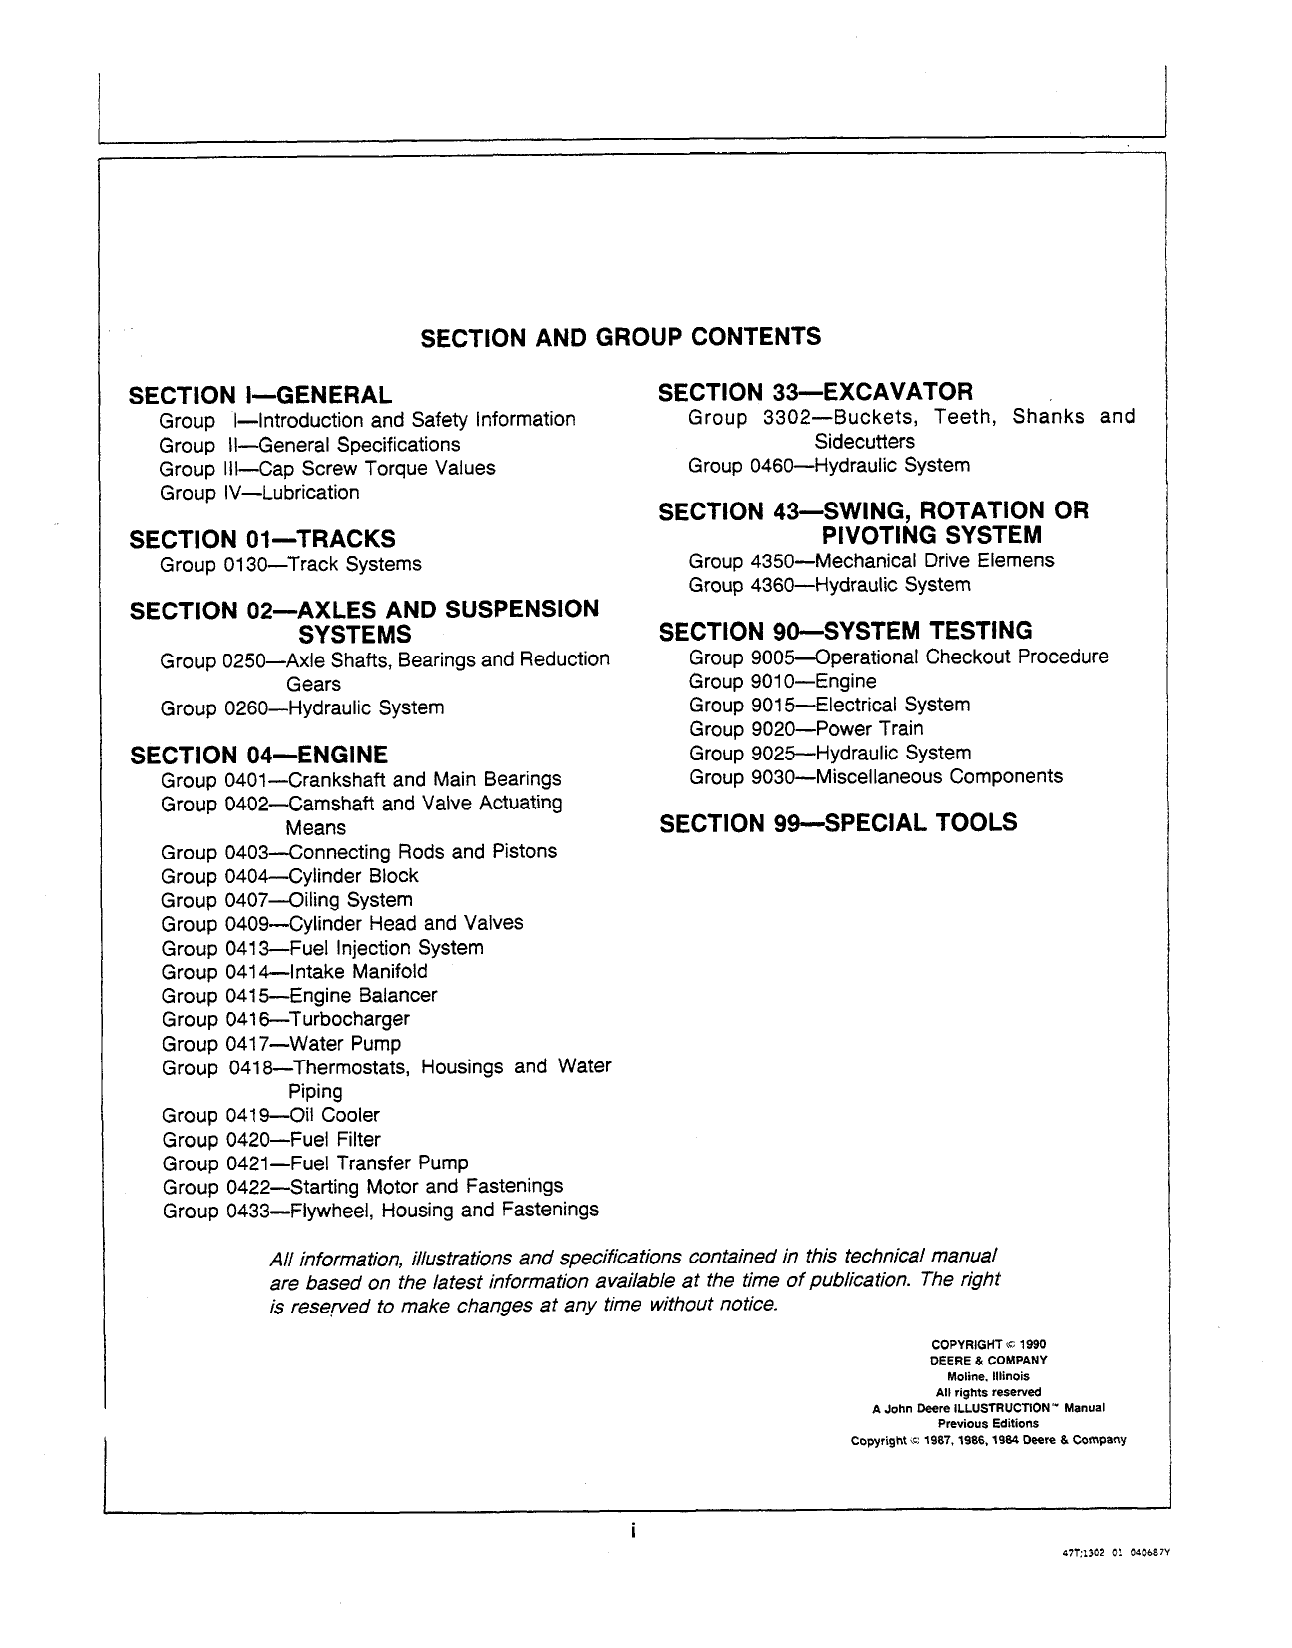 John Deere 490 Hydraulic Excavator technical manual Preview image 5